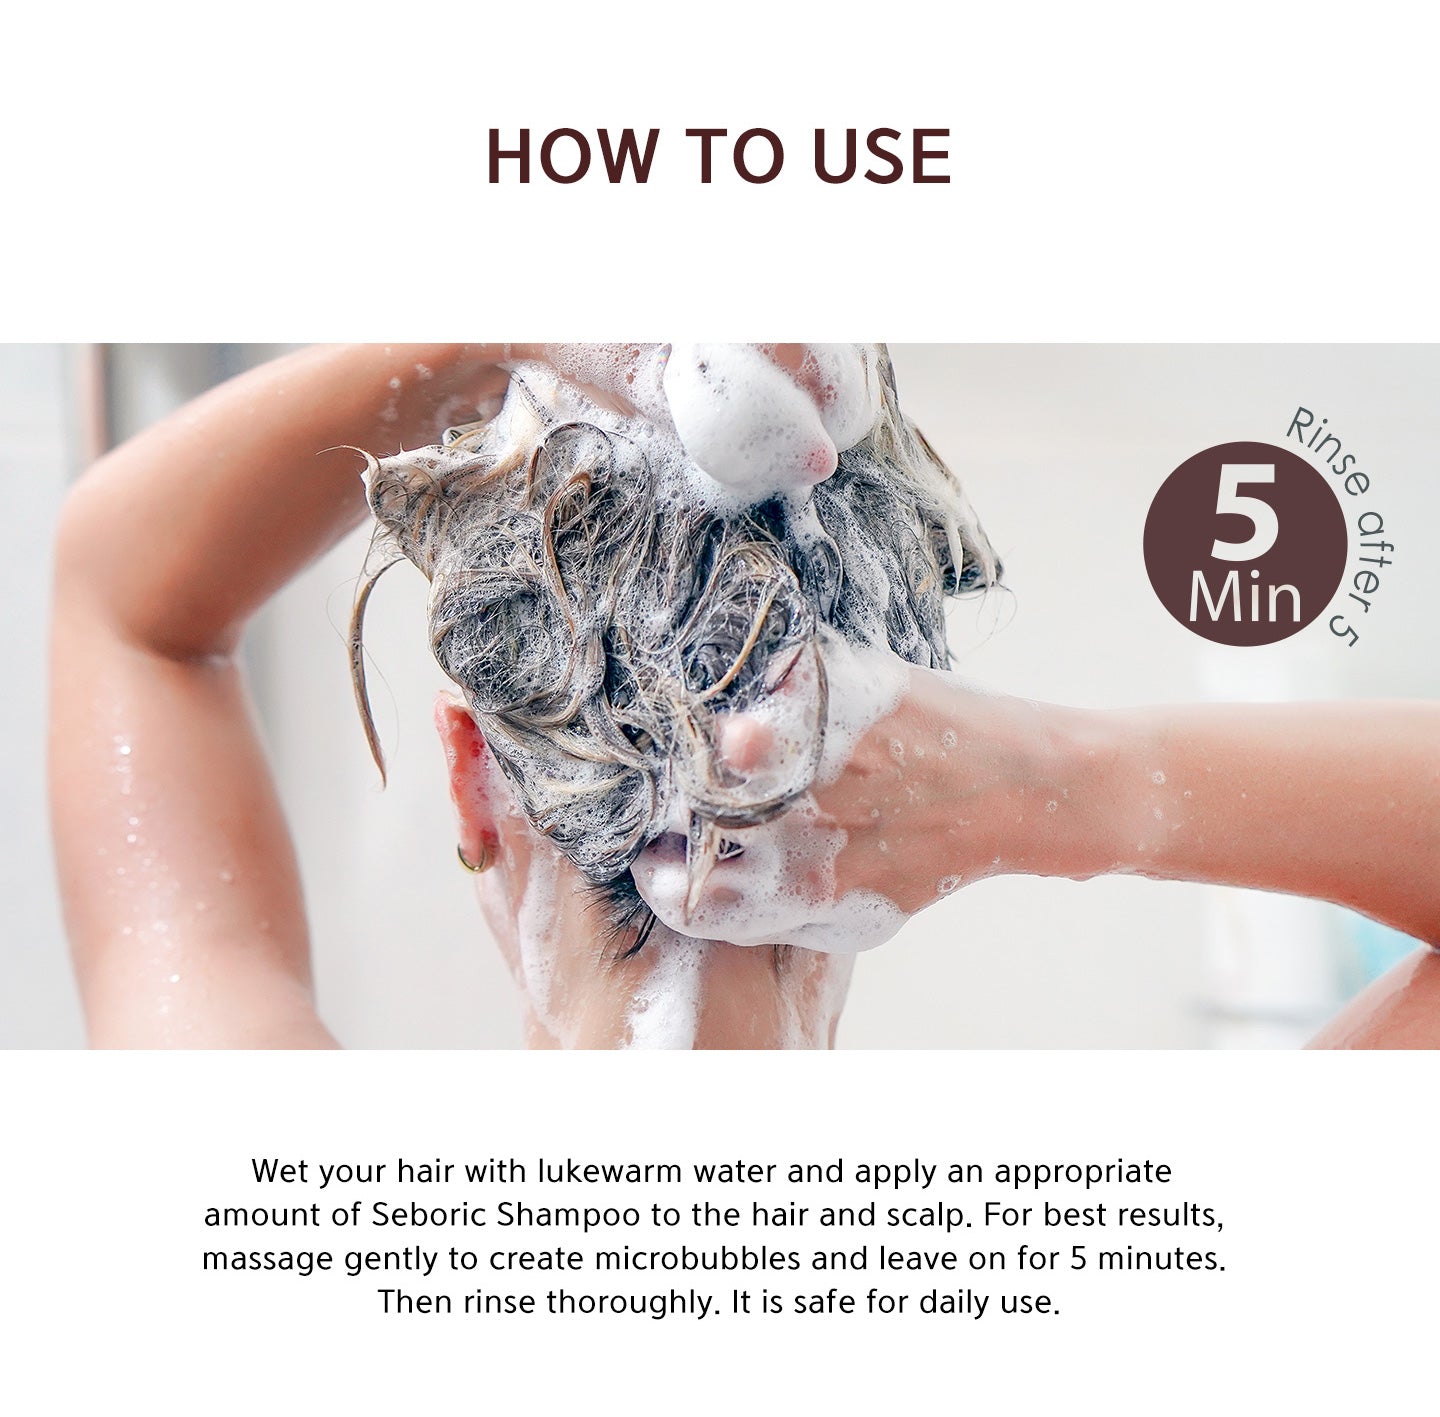 Wet your hair with lukewarm water and apply an appropriate amount of seboric shampoo to the hair and scalp. For best results, massage gently to create microbubbles and leave on for 5 minutes. Then rinse thoroughly. It is safe for daily use. 